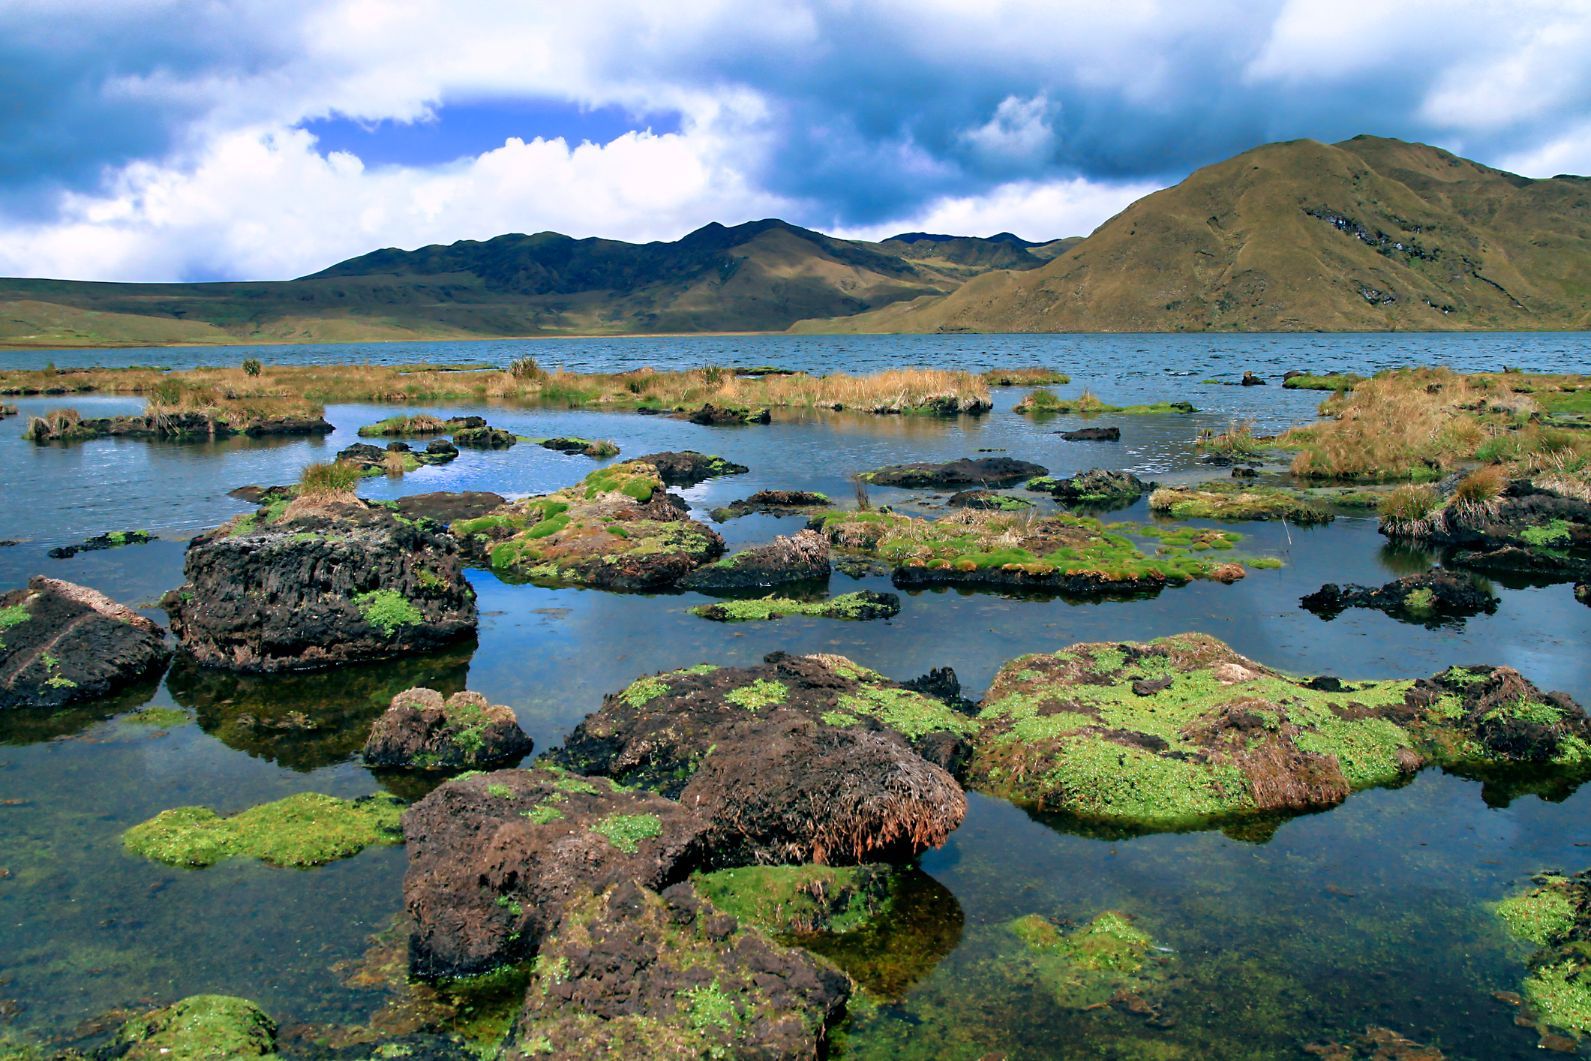 Lakes, boulders and mountains in Cajas National Park in Ecuador